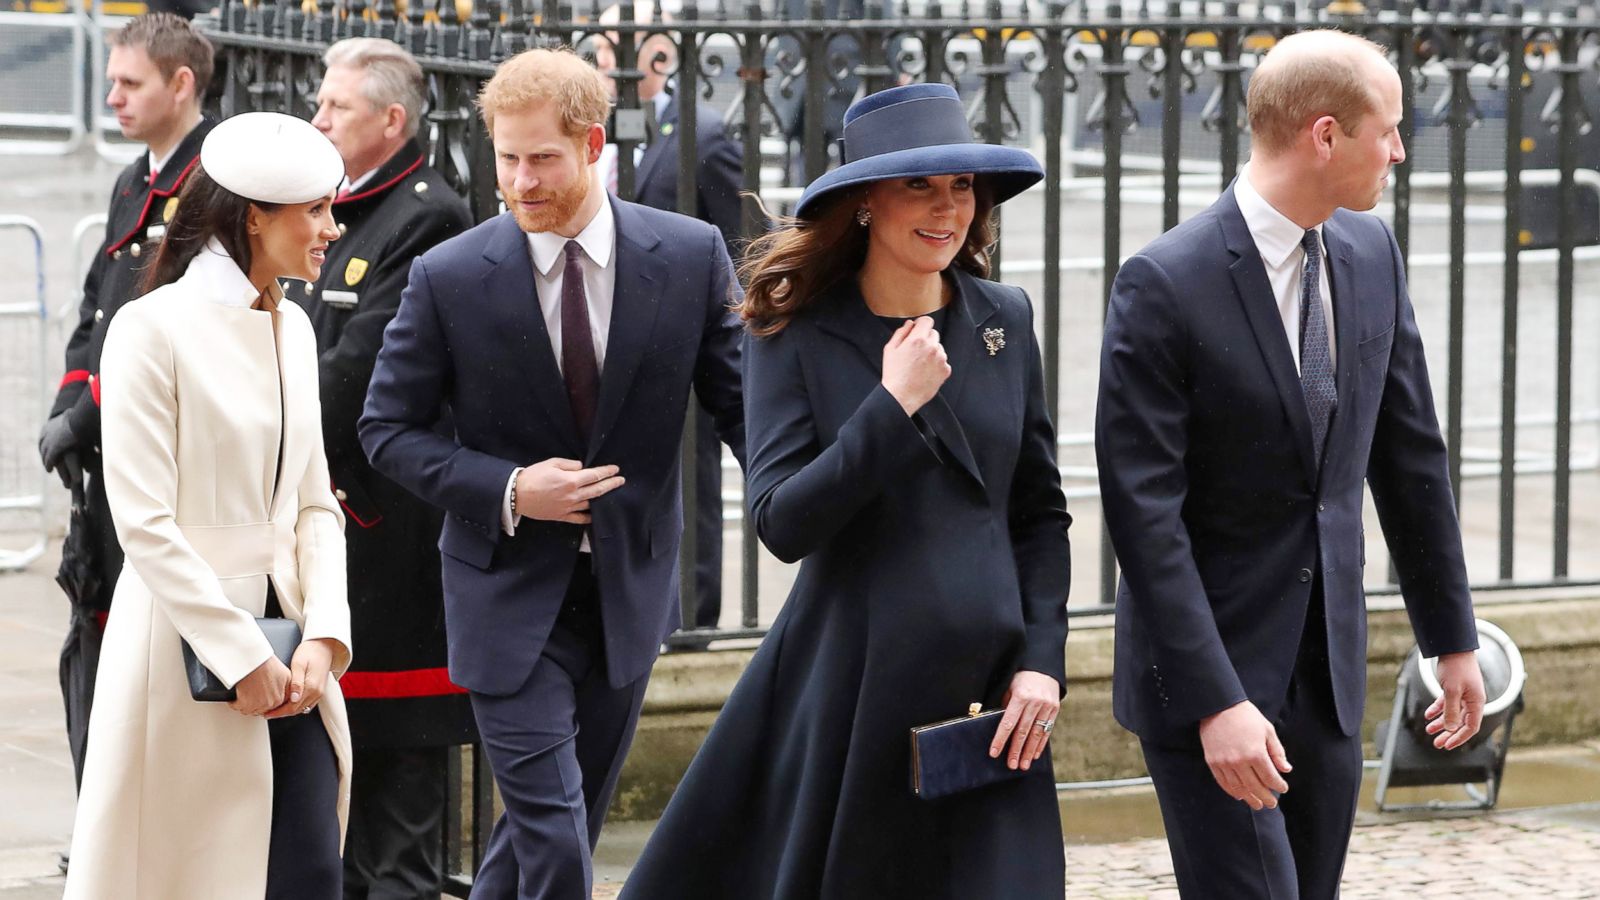 PHOTO: Catherine, Duchess of Cambridge, and her husband Prince William, Duke of Cambridge arrive with Britain's Prince Harry and his fiancee Meghan Markle to attend a Commonwealth Day Service at Westminster Abbey in central London, on March 12, 2018.